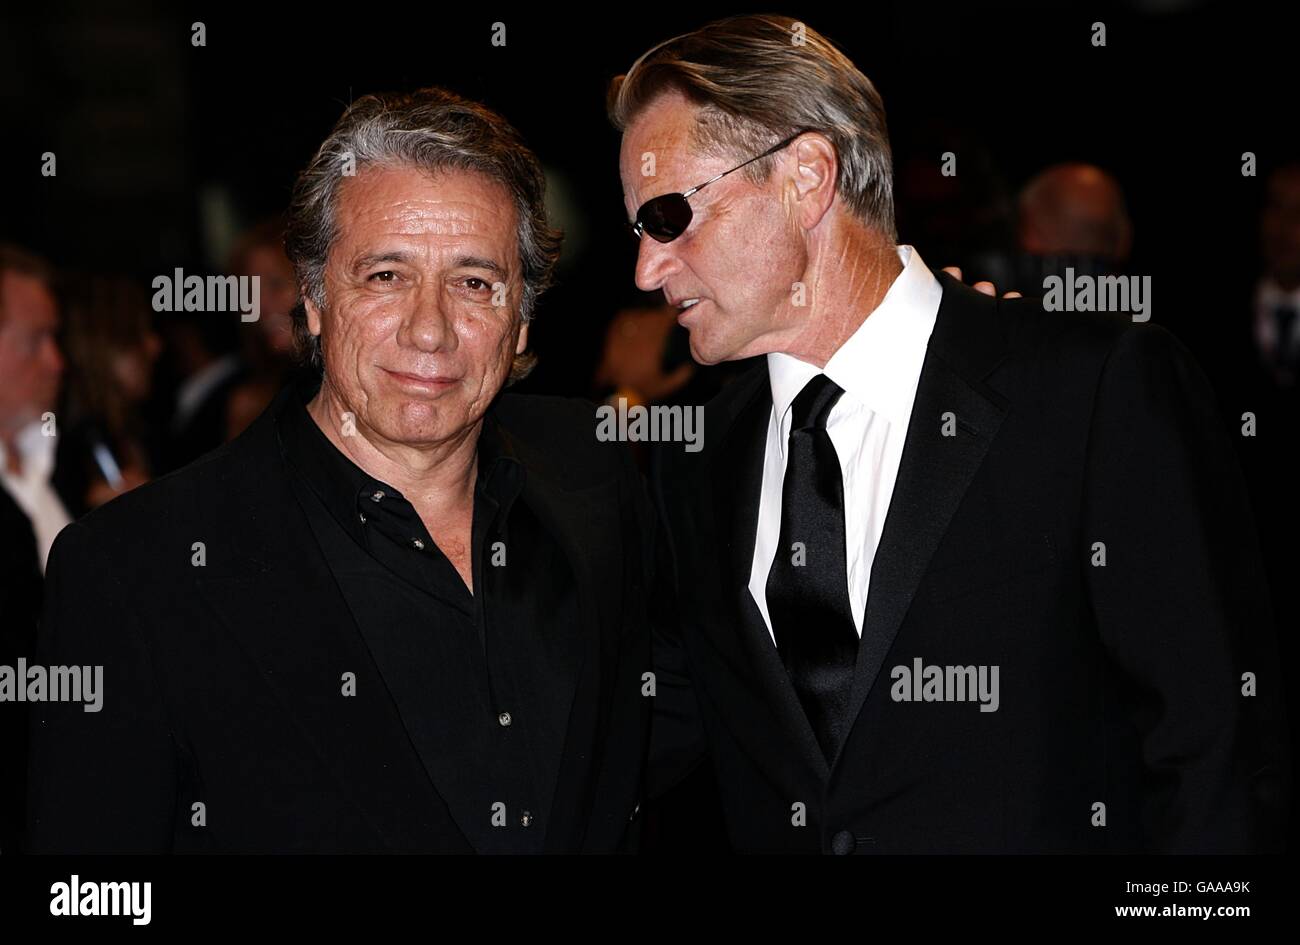 Edward James Olmos and Sam Shepherd arrive for the premiere of 'The Assassination of Jesse James' premiere at the Venice Film Festival, Italy. Stock Photo